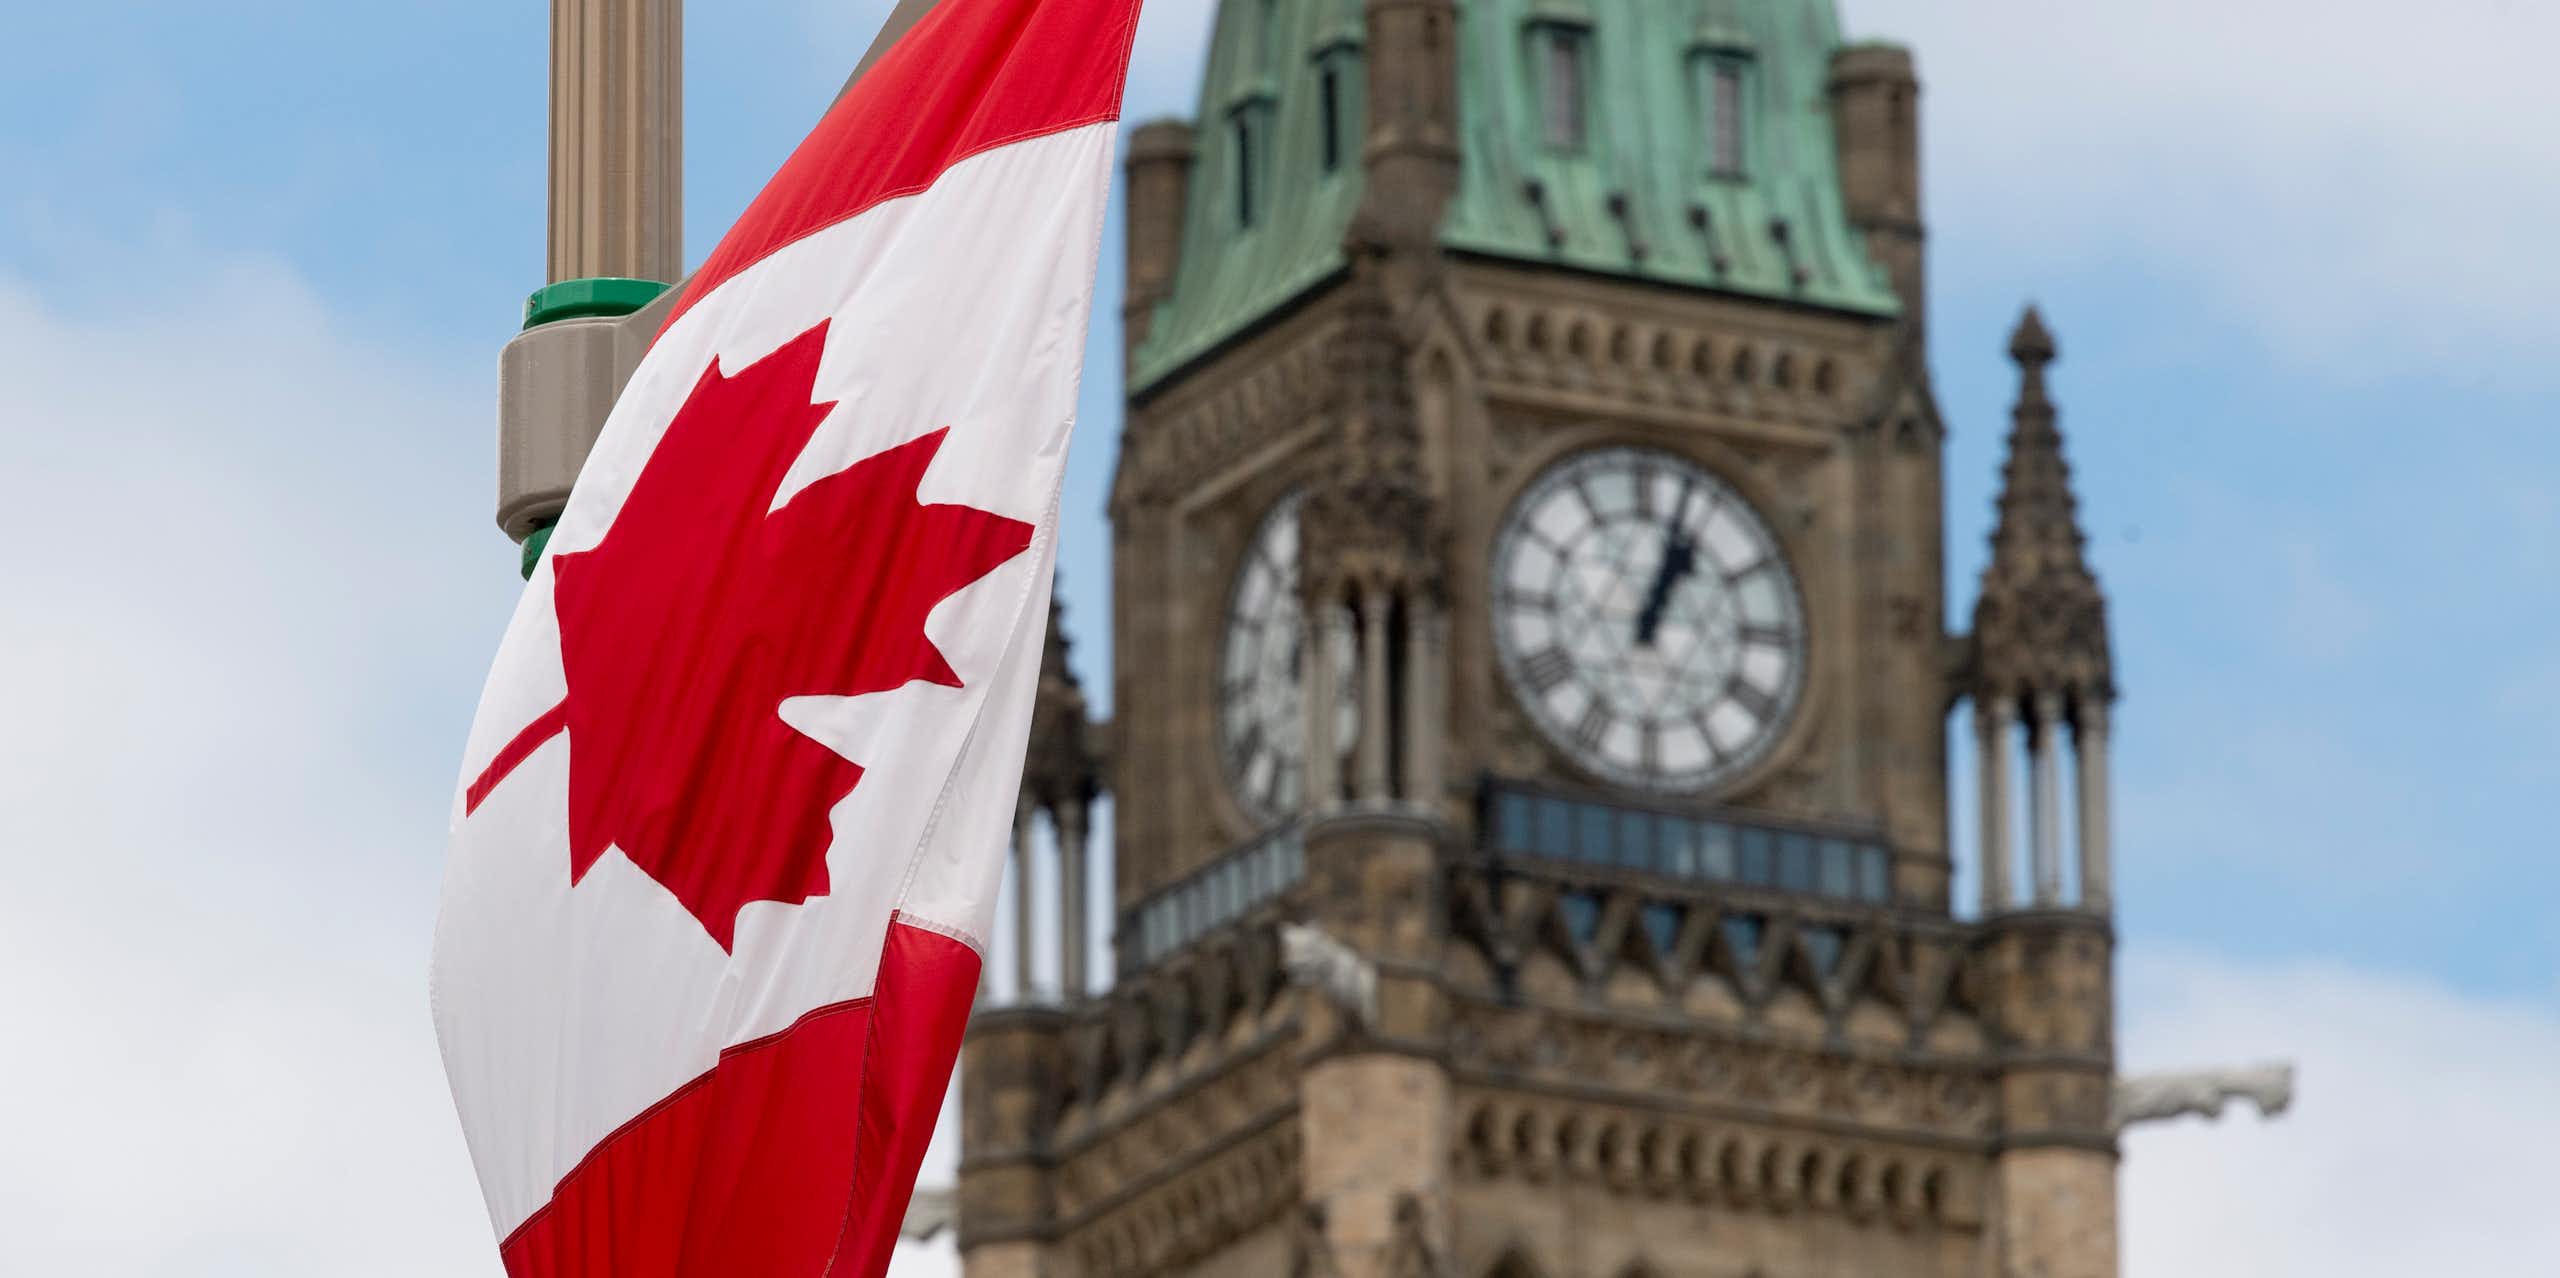 A Canadian flag hands in front of a clock tower